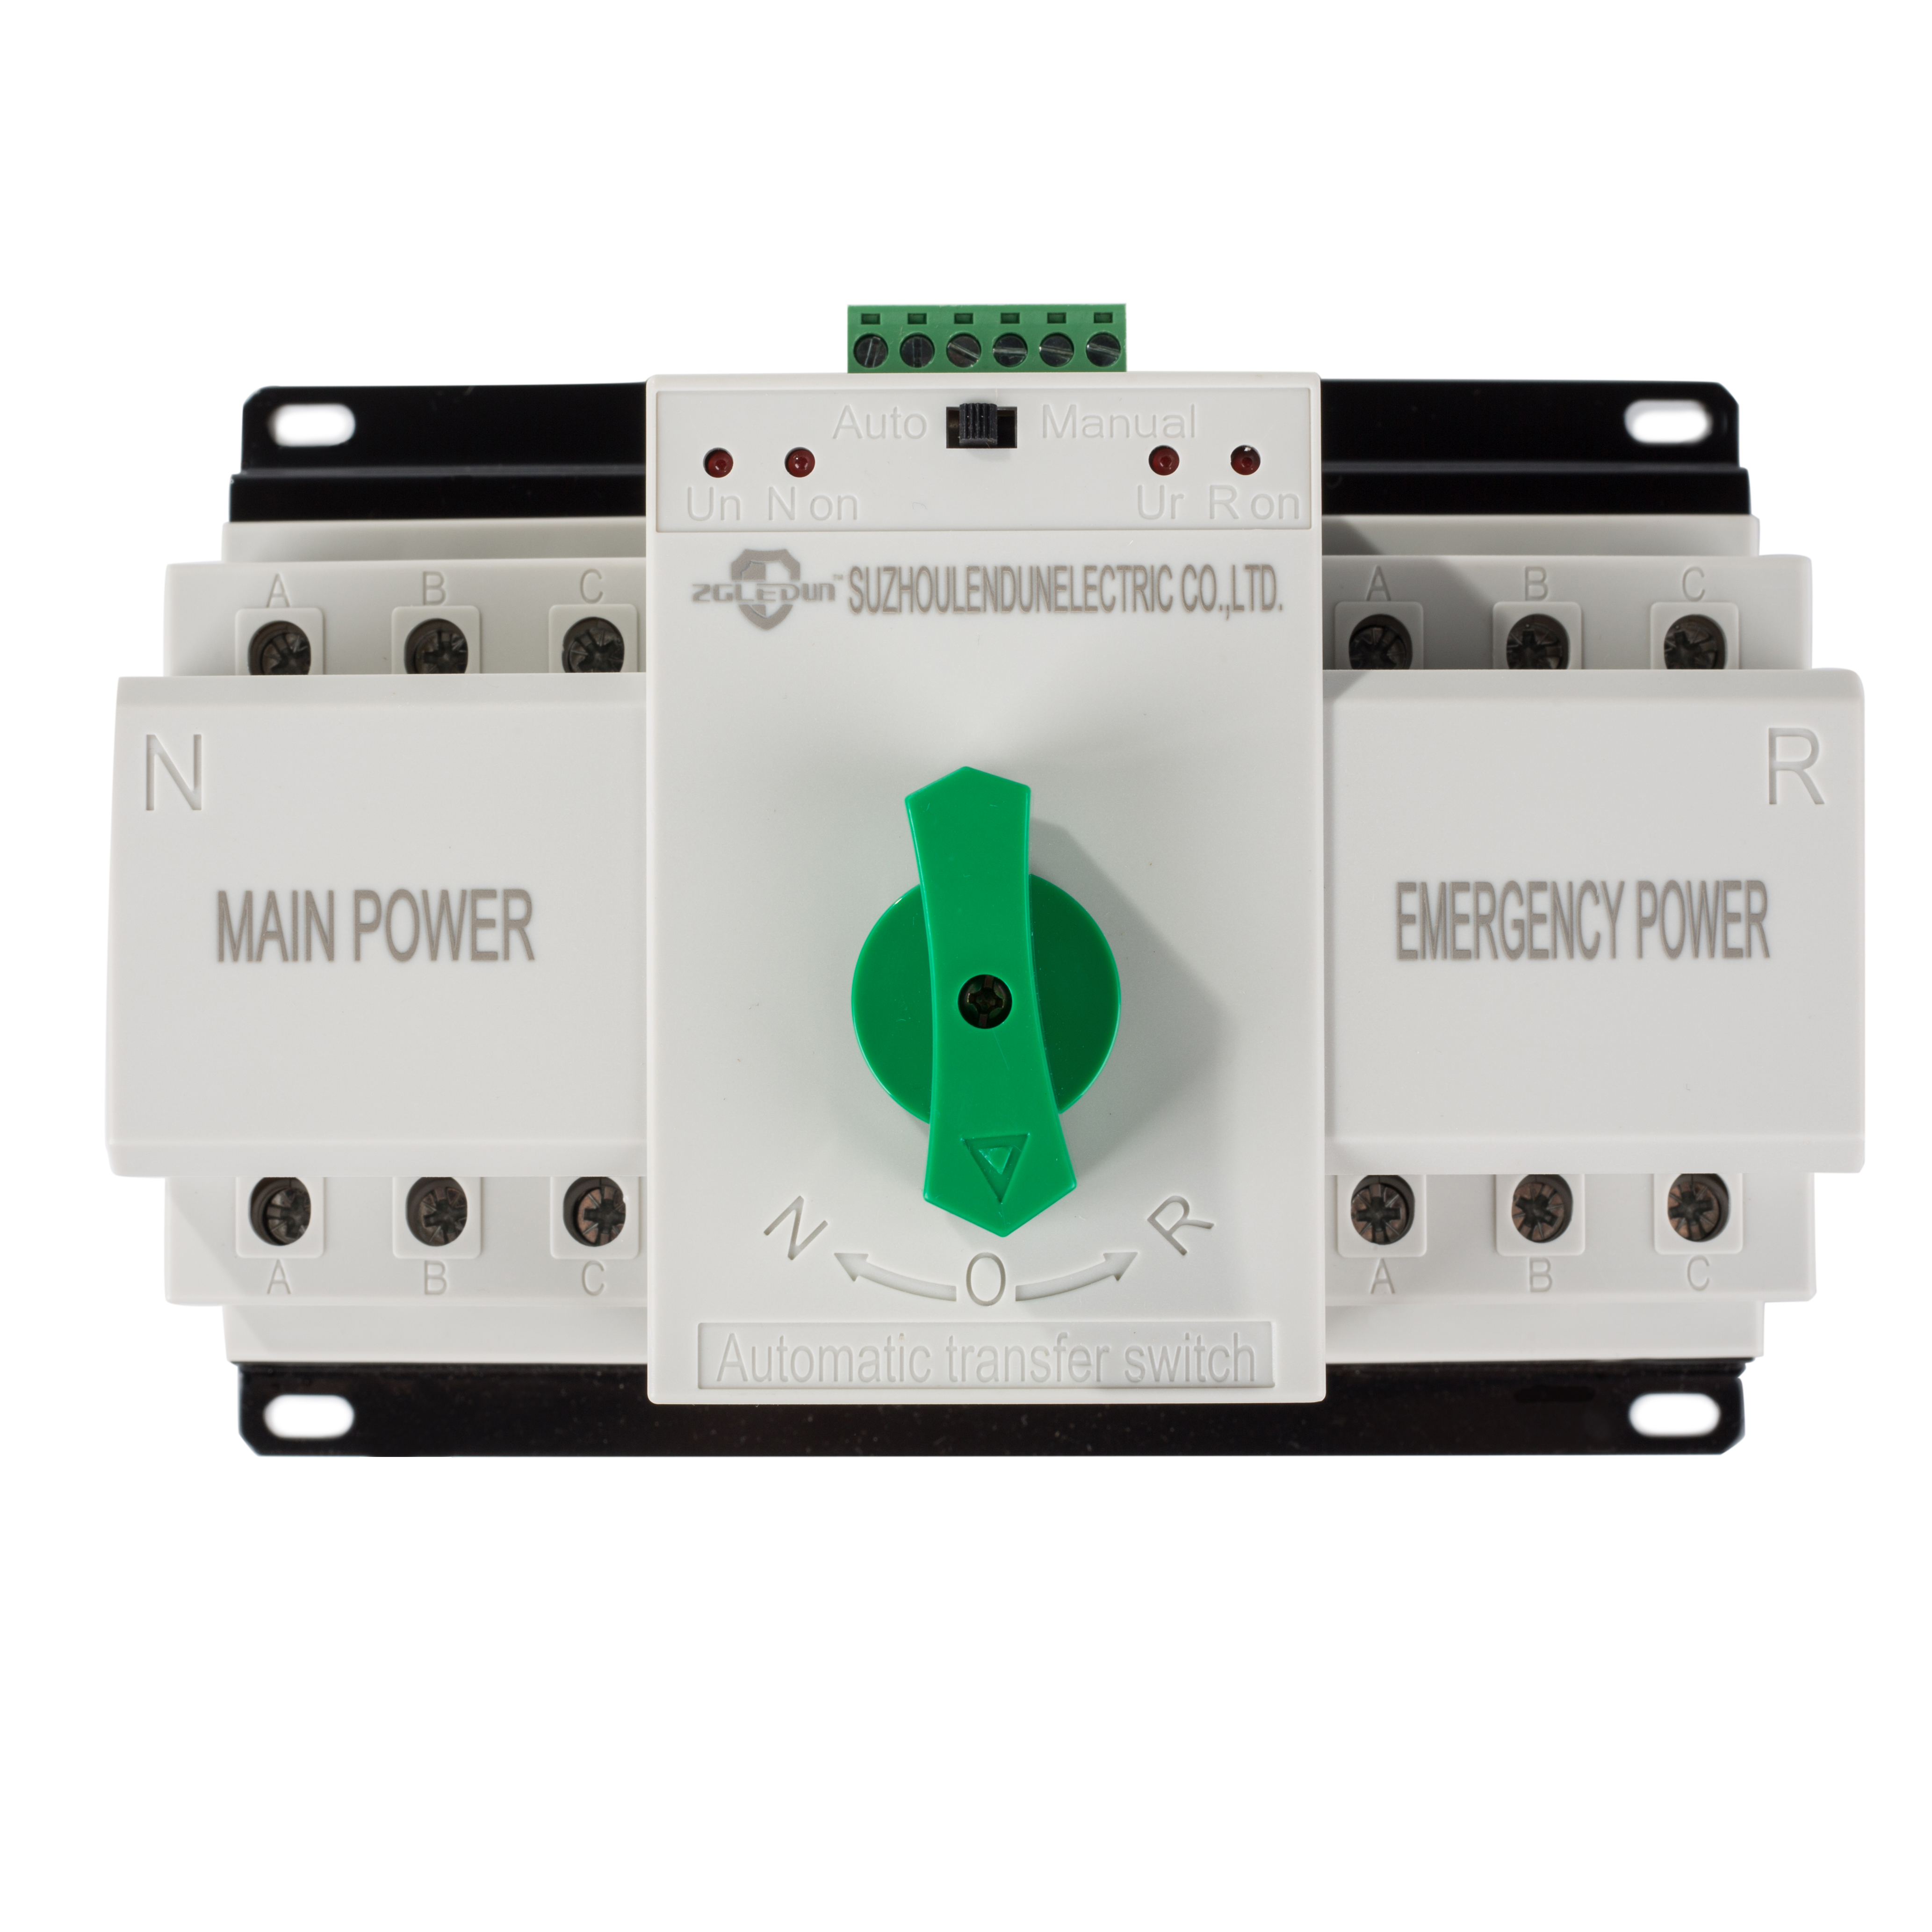 CB Level Mini Dual Power Automatic Transfer Switch, ATSE 2P,3P,4P 63A, Intelligent Change Over Switch Featured Image